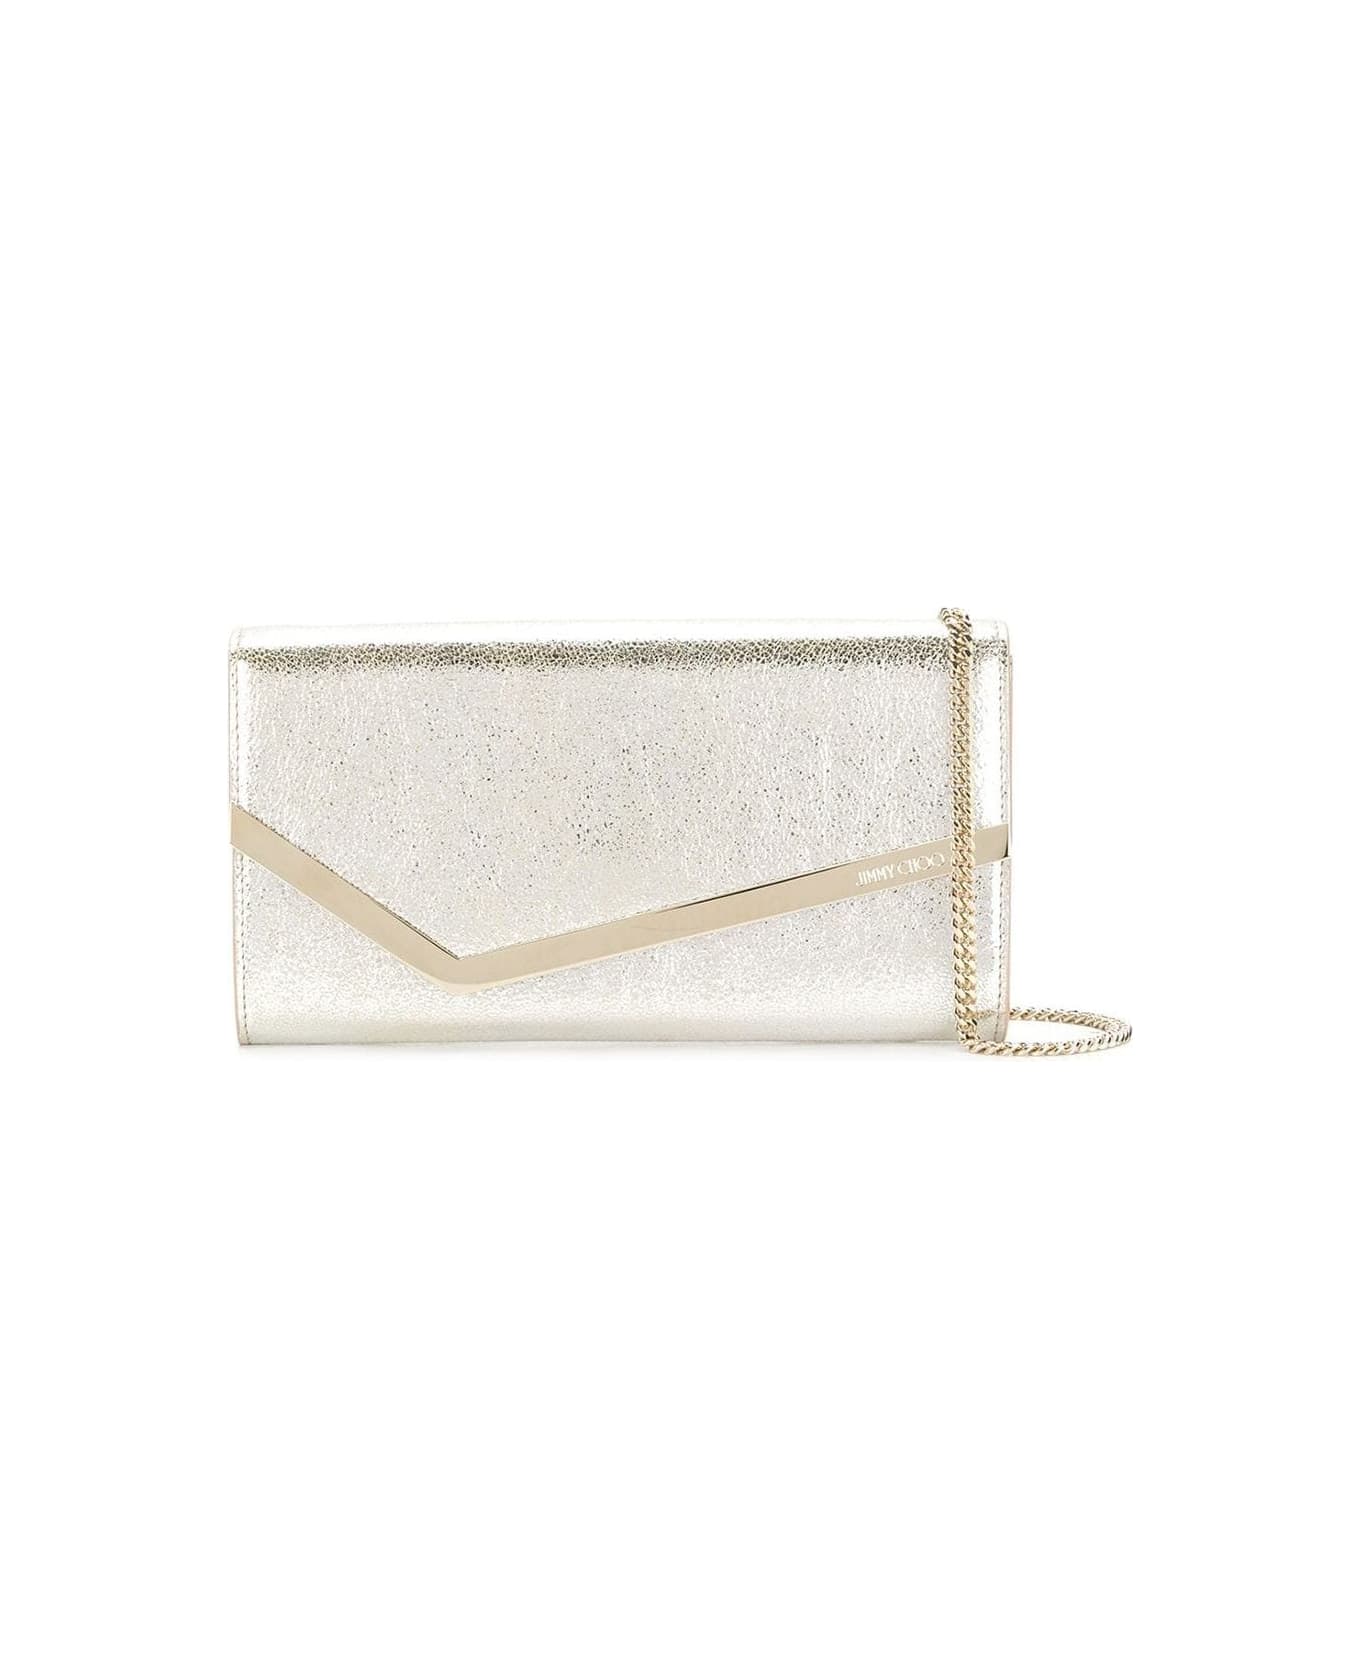 Jimmy Choo Emmie Clutch Bag In Champagne Leather With Glitter - White クラッチバッグ